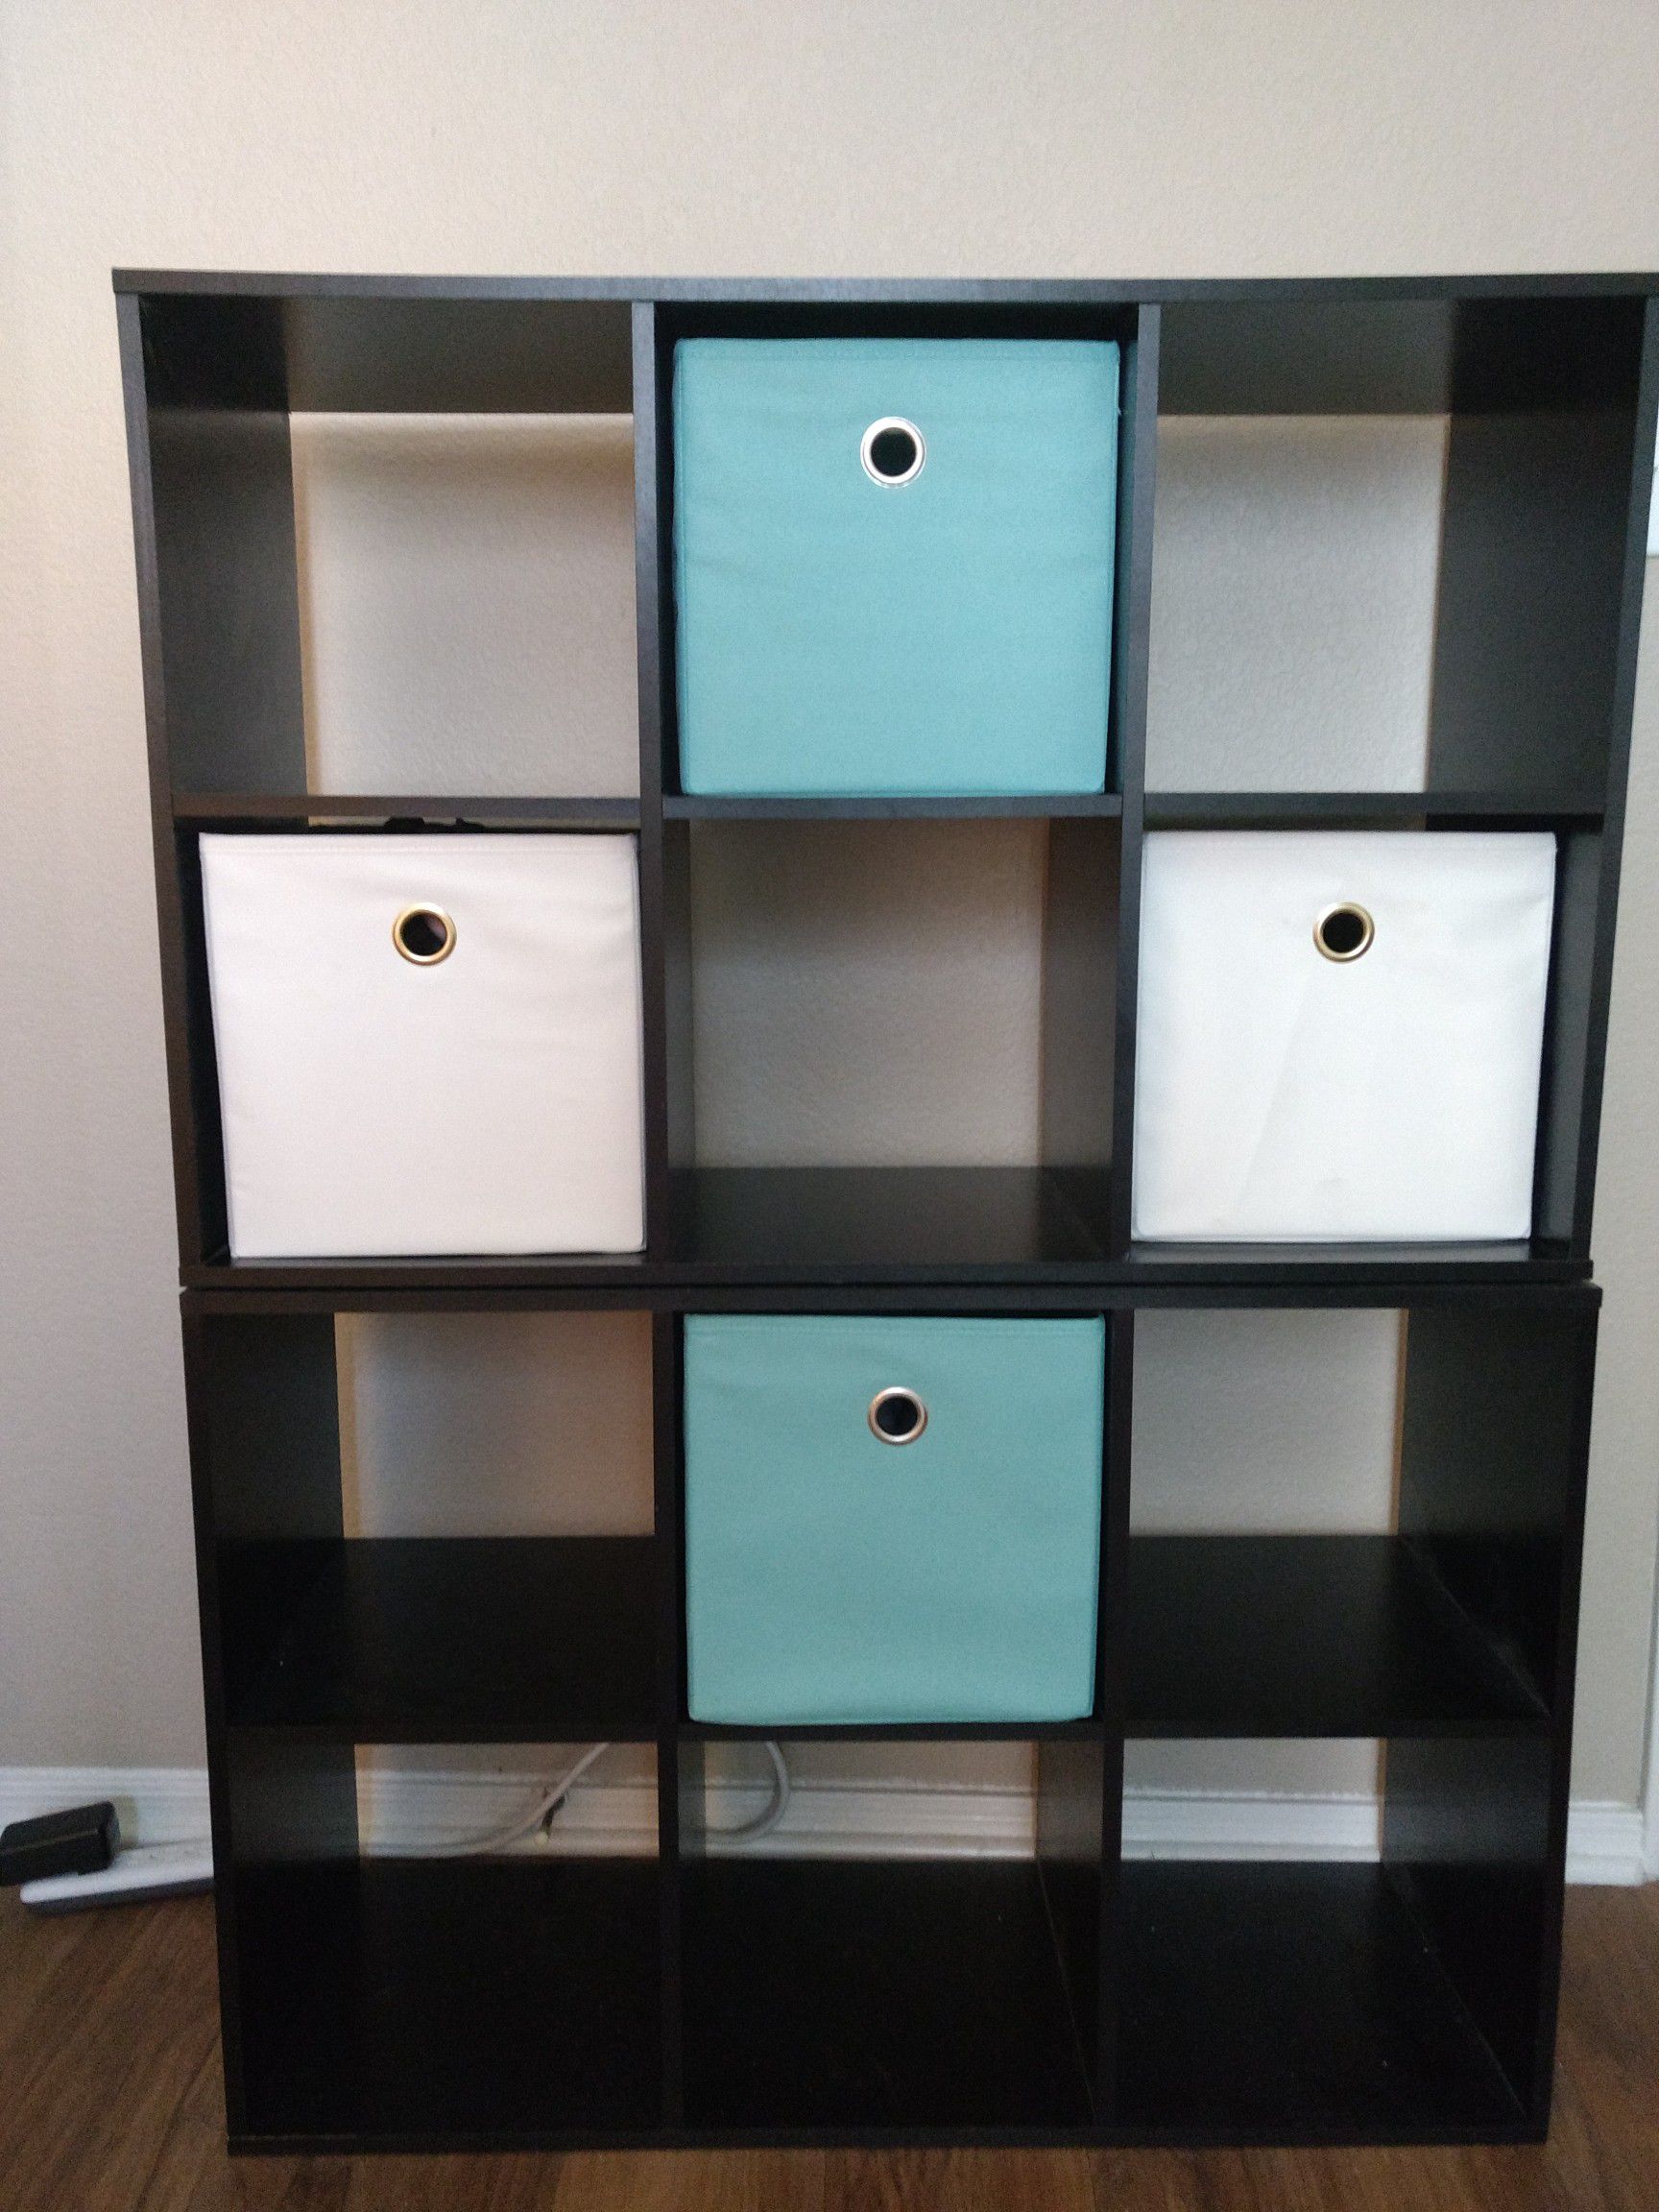 2 new bookshelves, black w/ cute storage containers